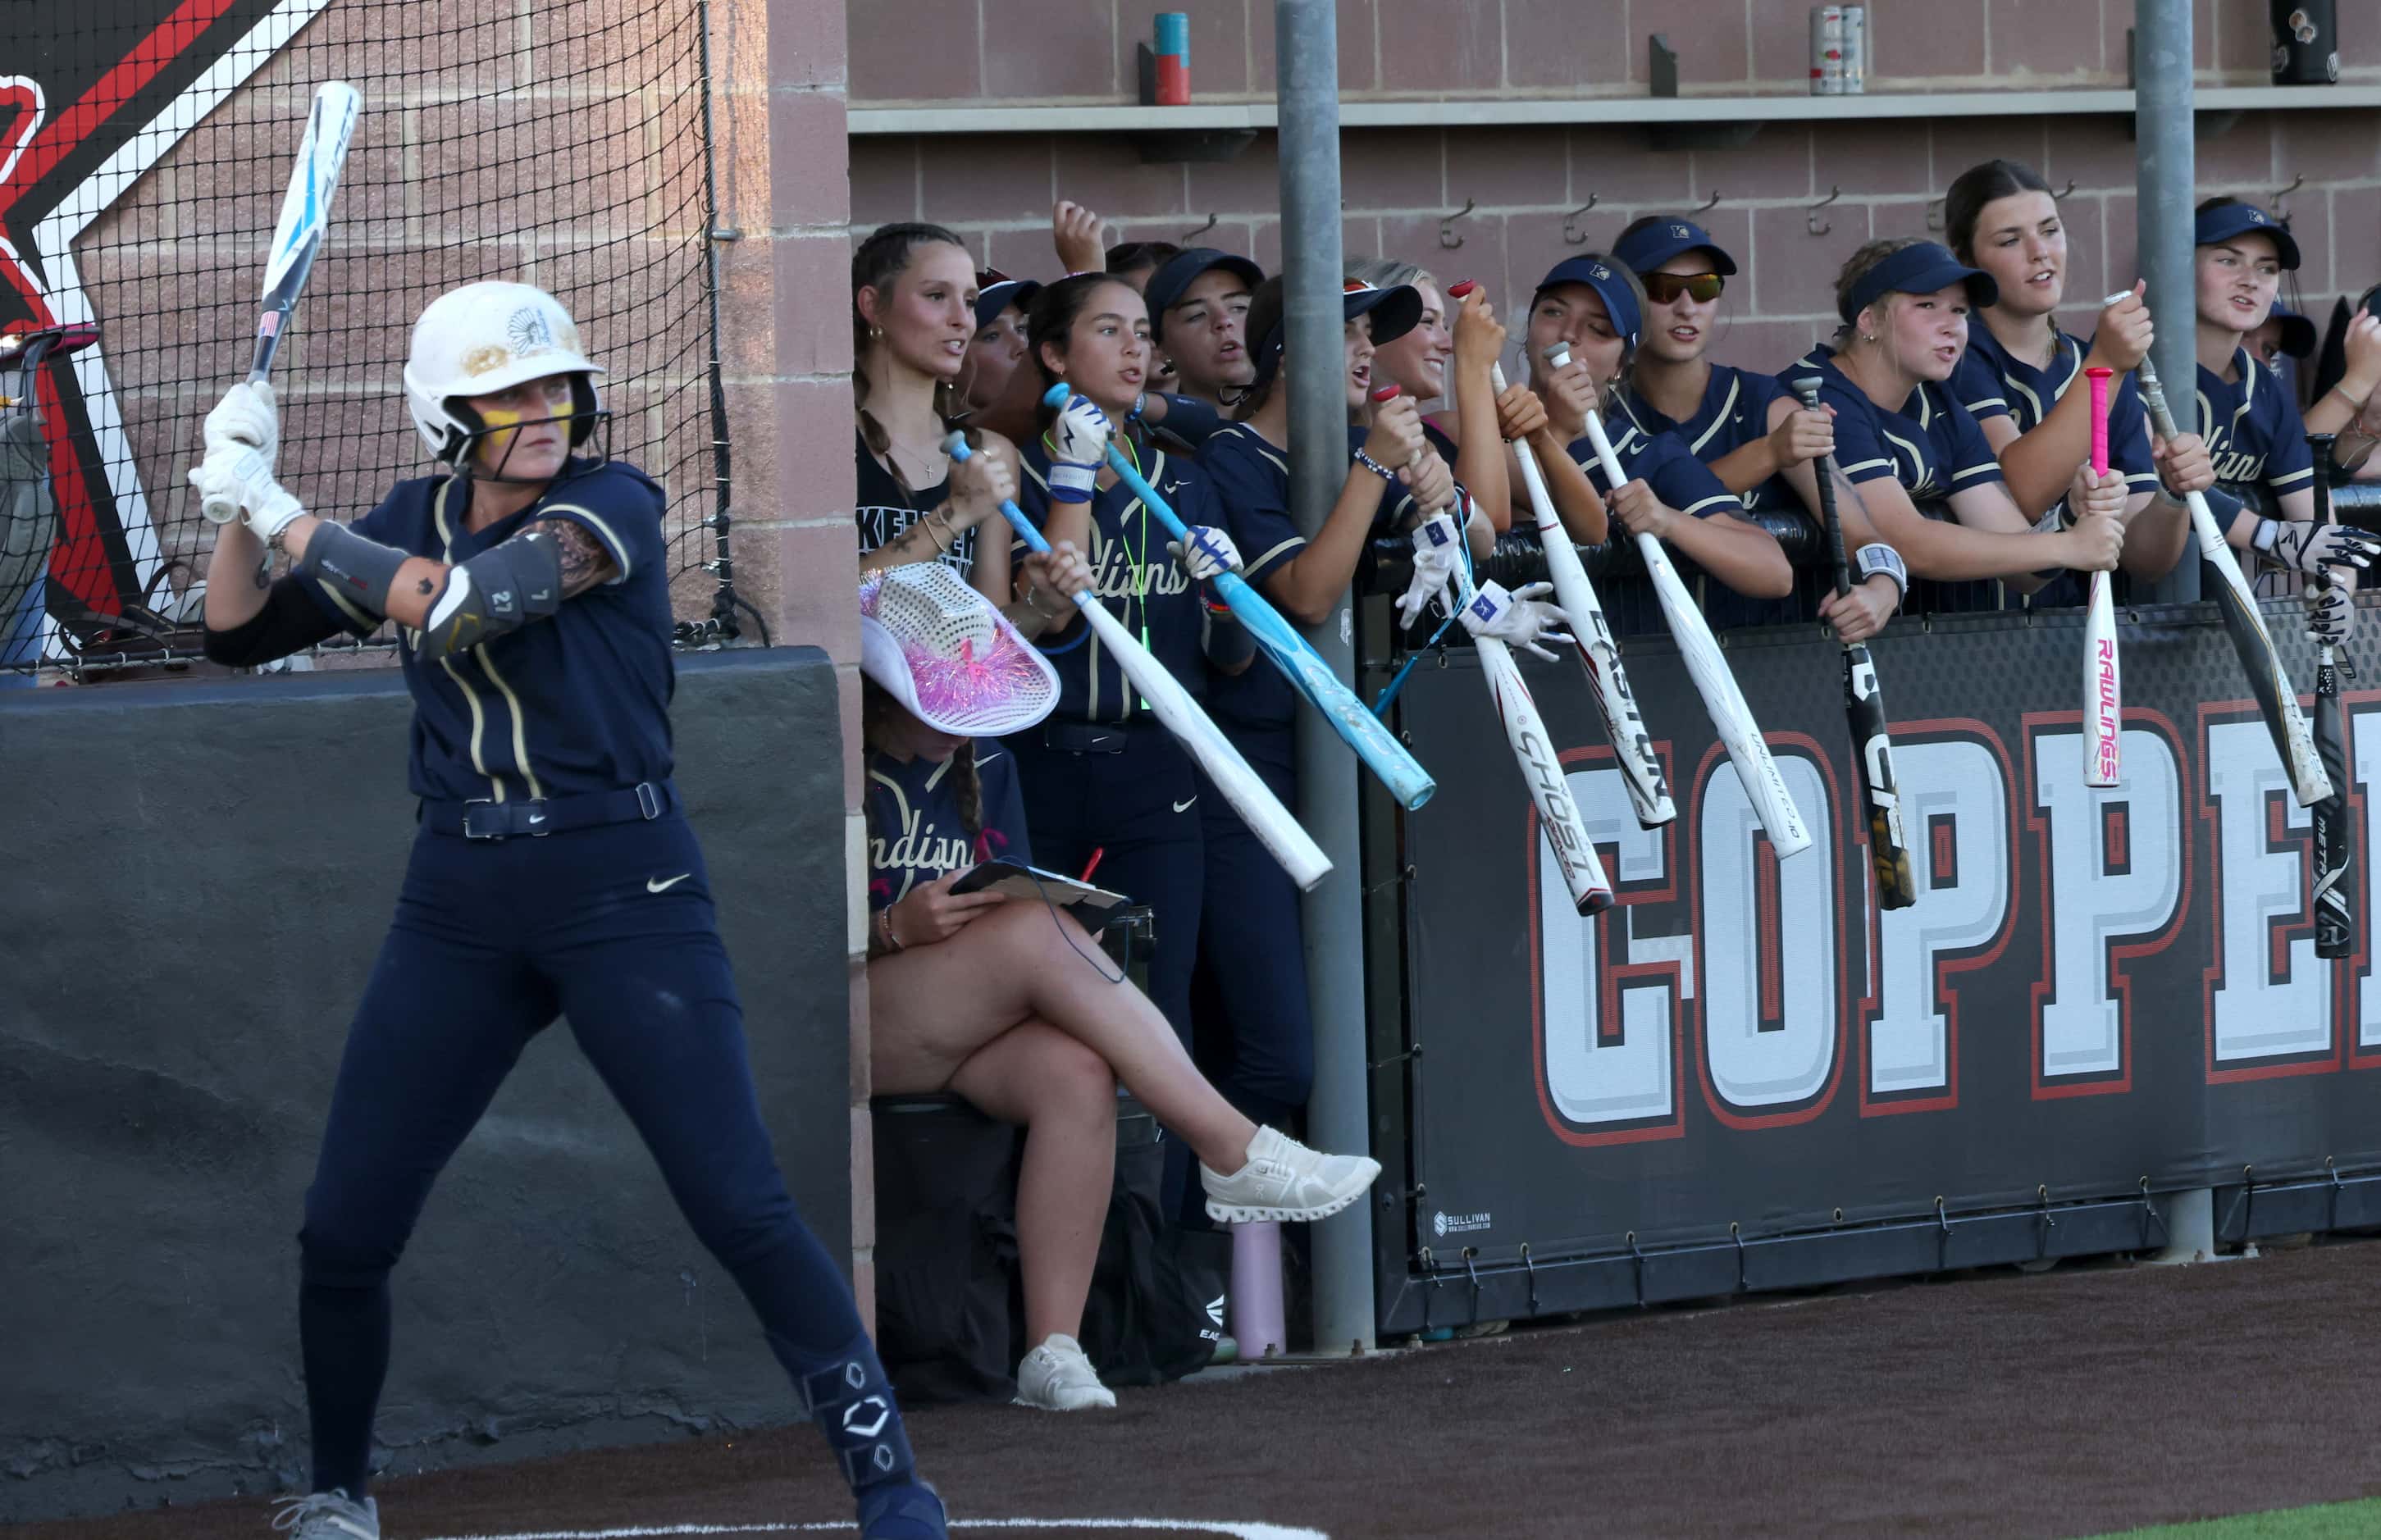 Keller players show their support from the team dugout during the 3rd inning of play against...